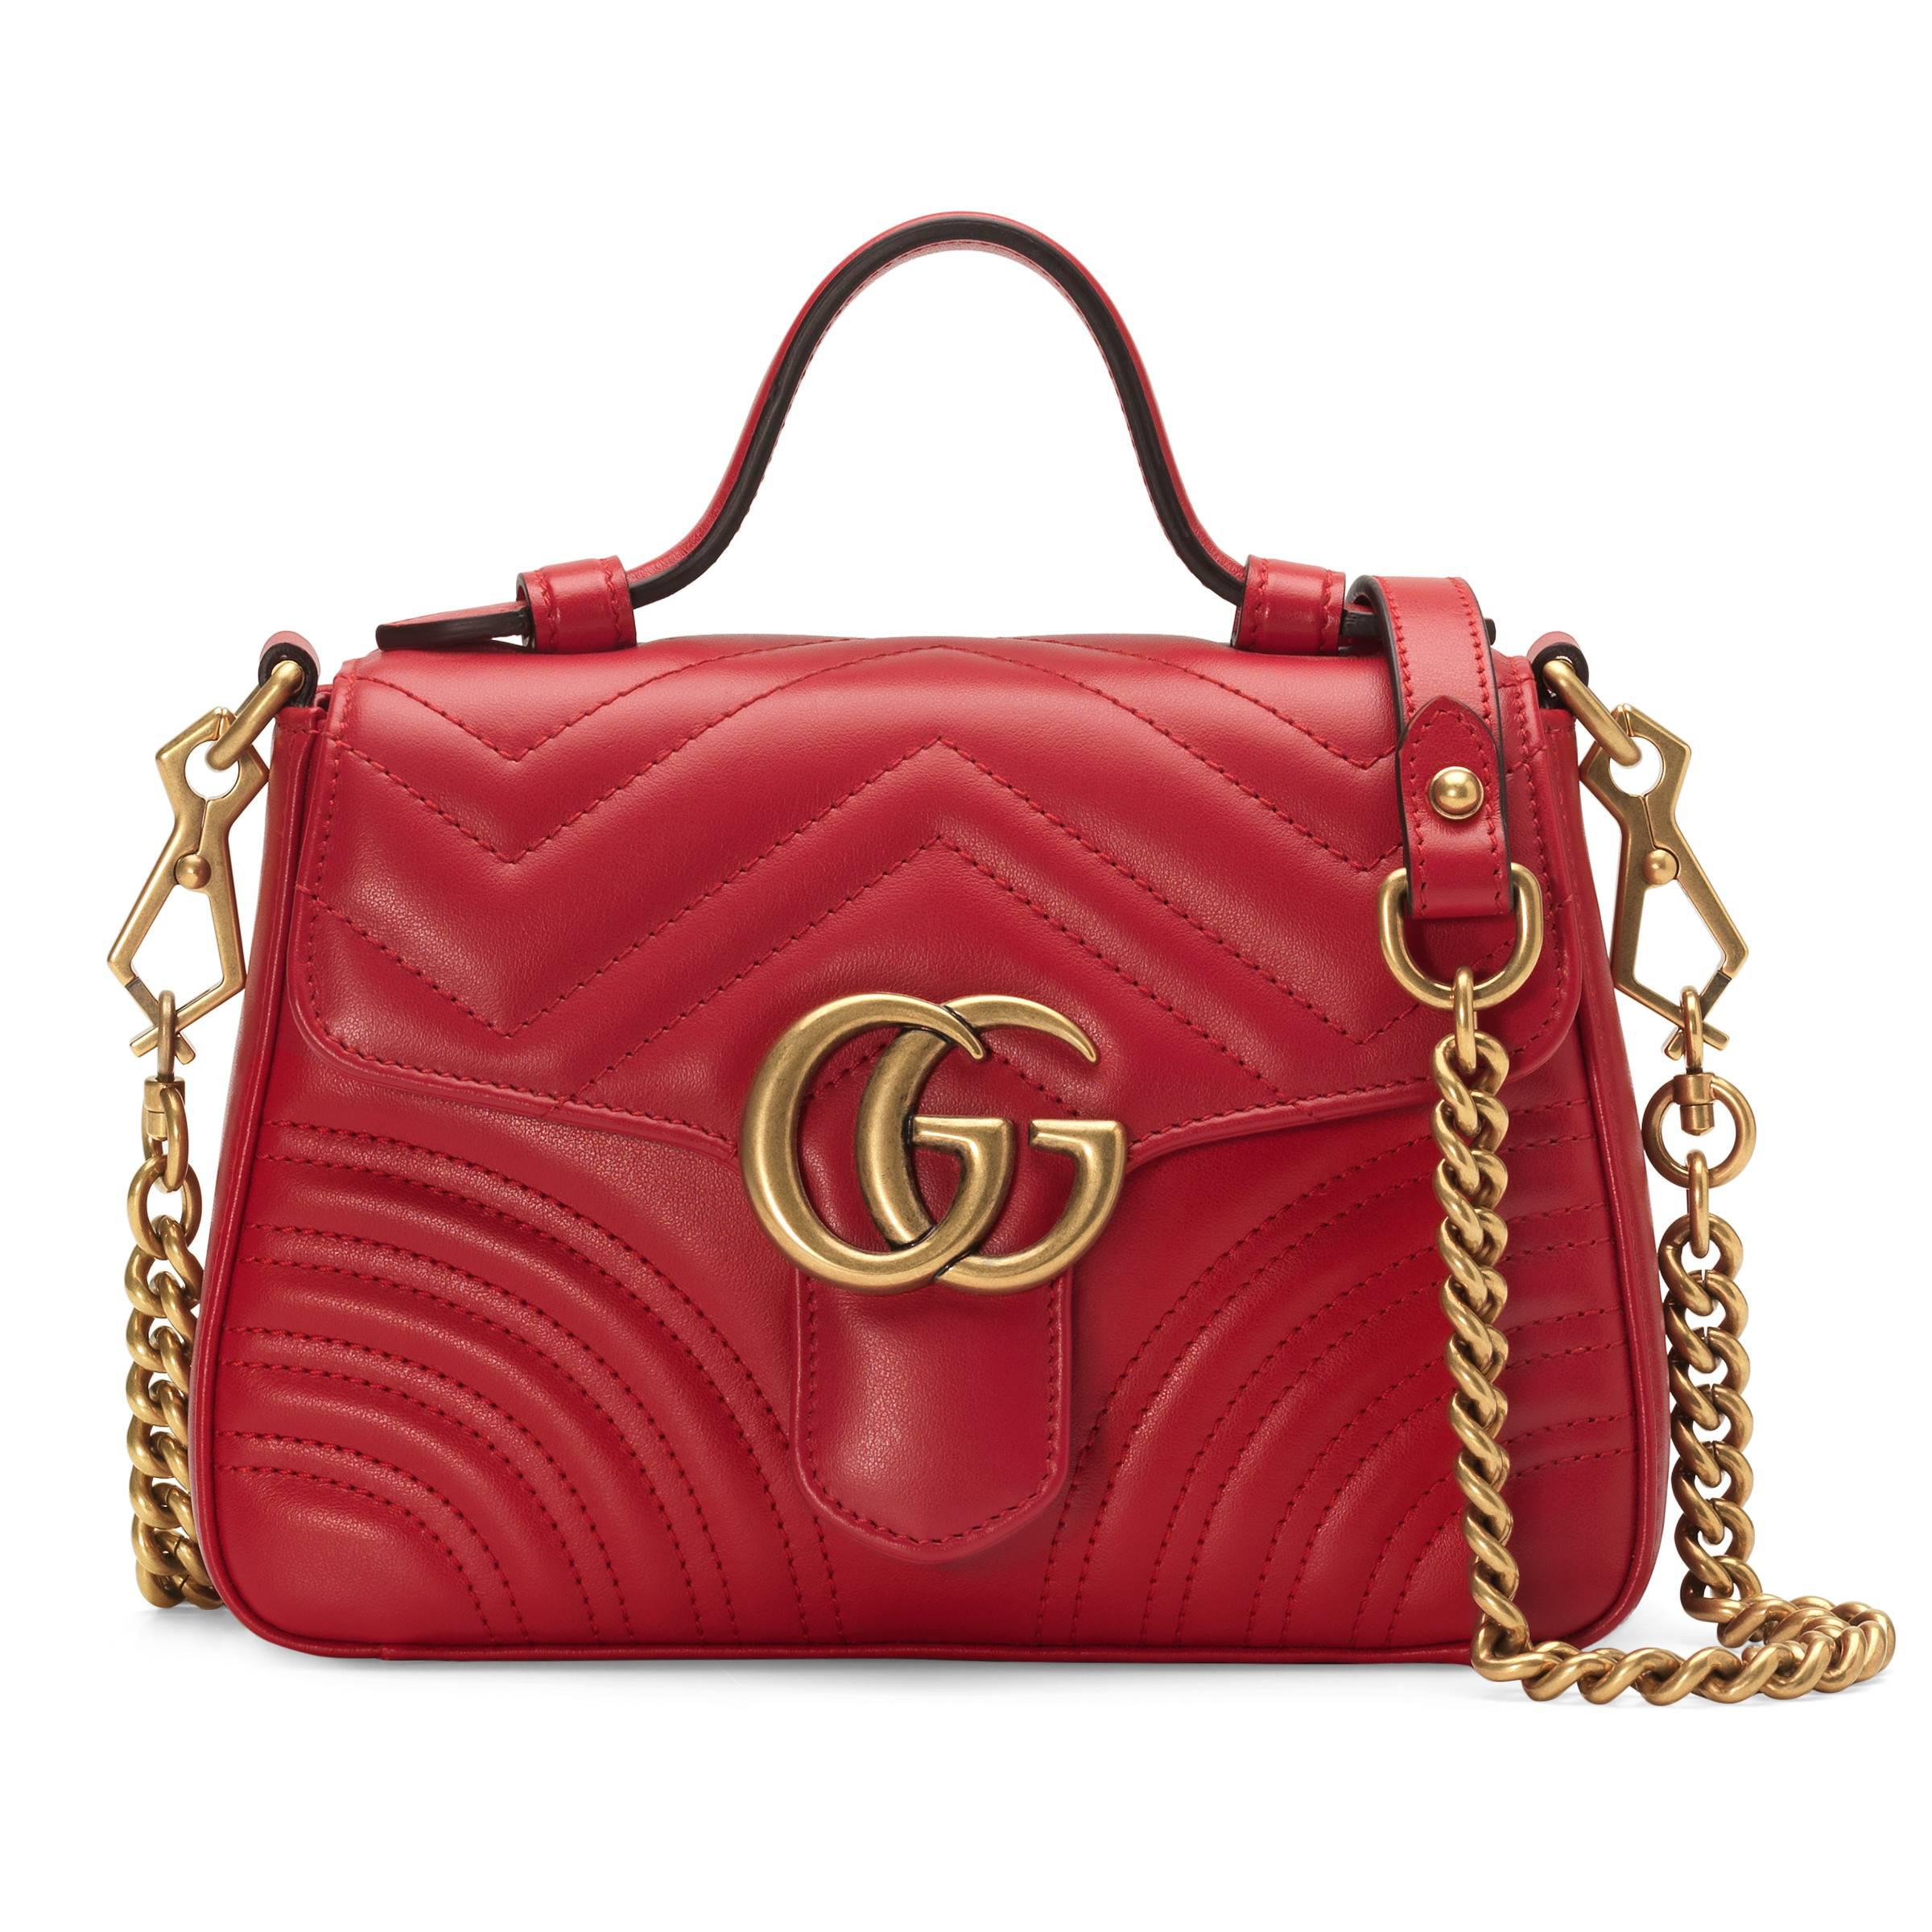 Gucci Leather GG Marmont Small Top Handle Bag in Red - Save 25% - Lyst